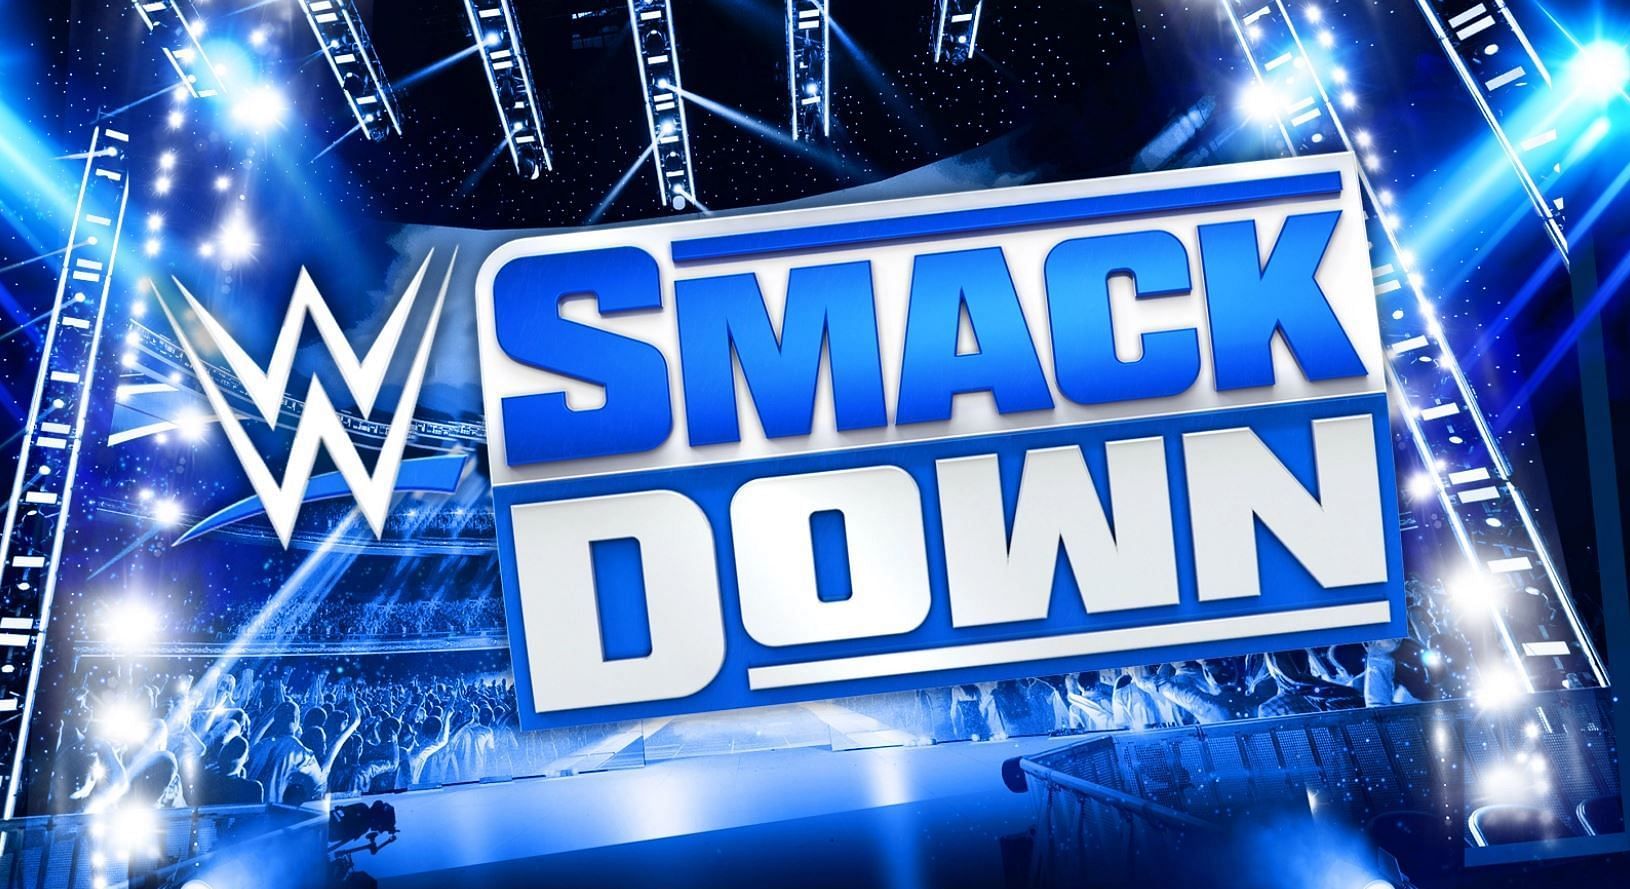 Triple H and team delivered another solid episode of WWE SmackDown